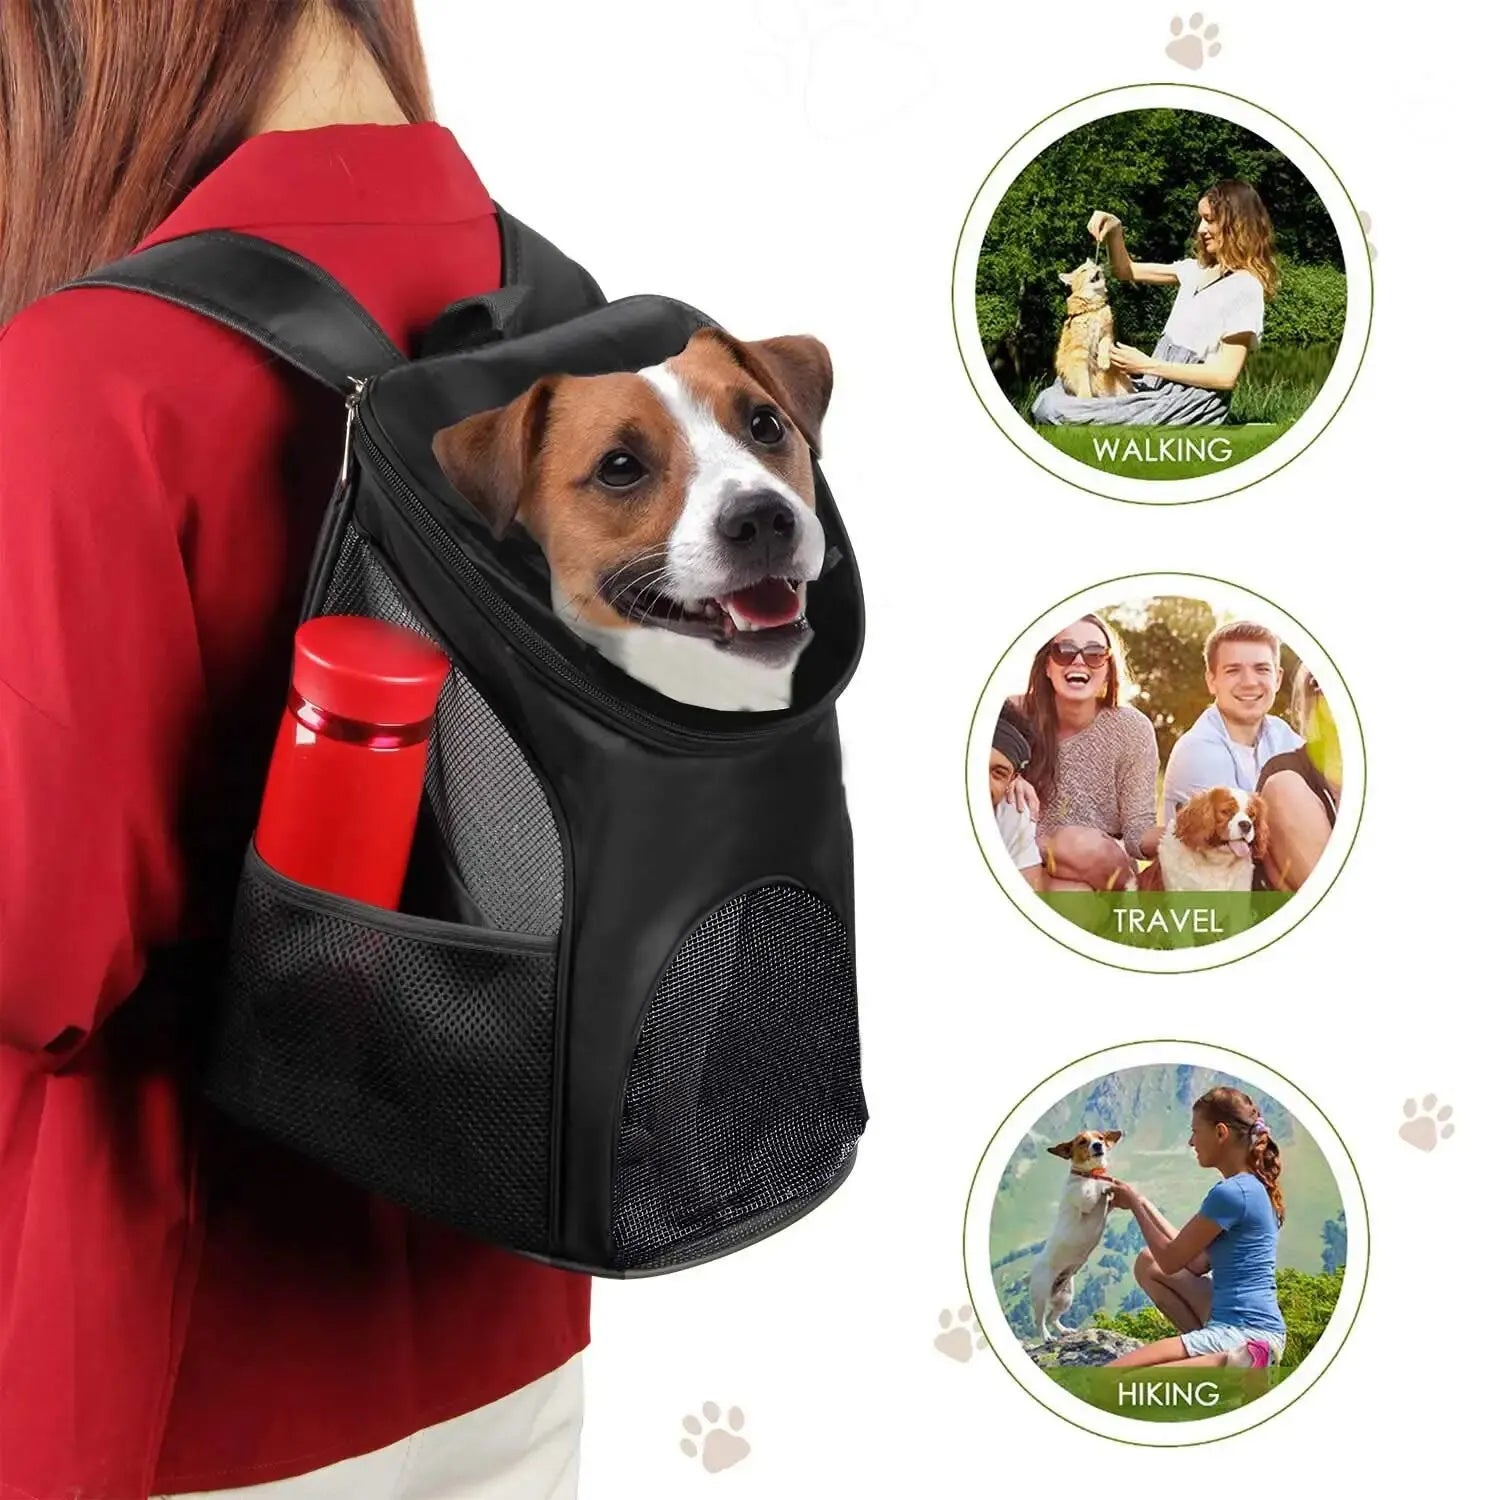 Ventilated Mesh Pet Carrier Backpack for Small Dogs and Cats  ourlum.com   